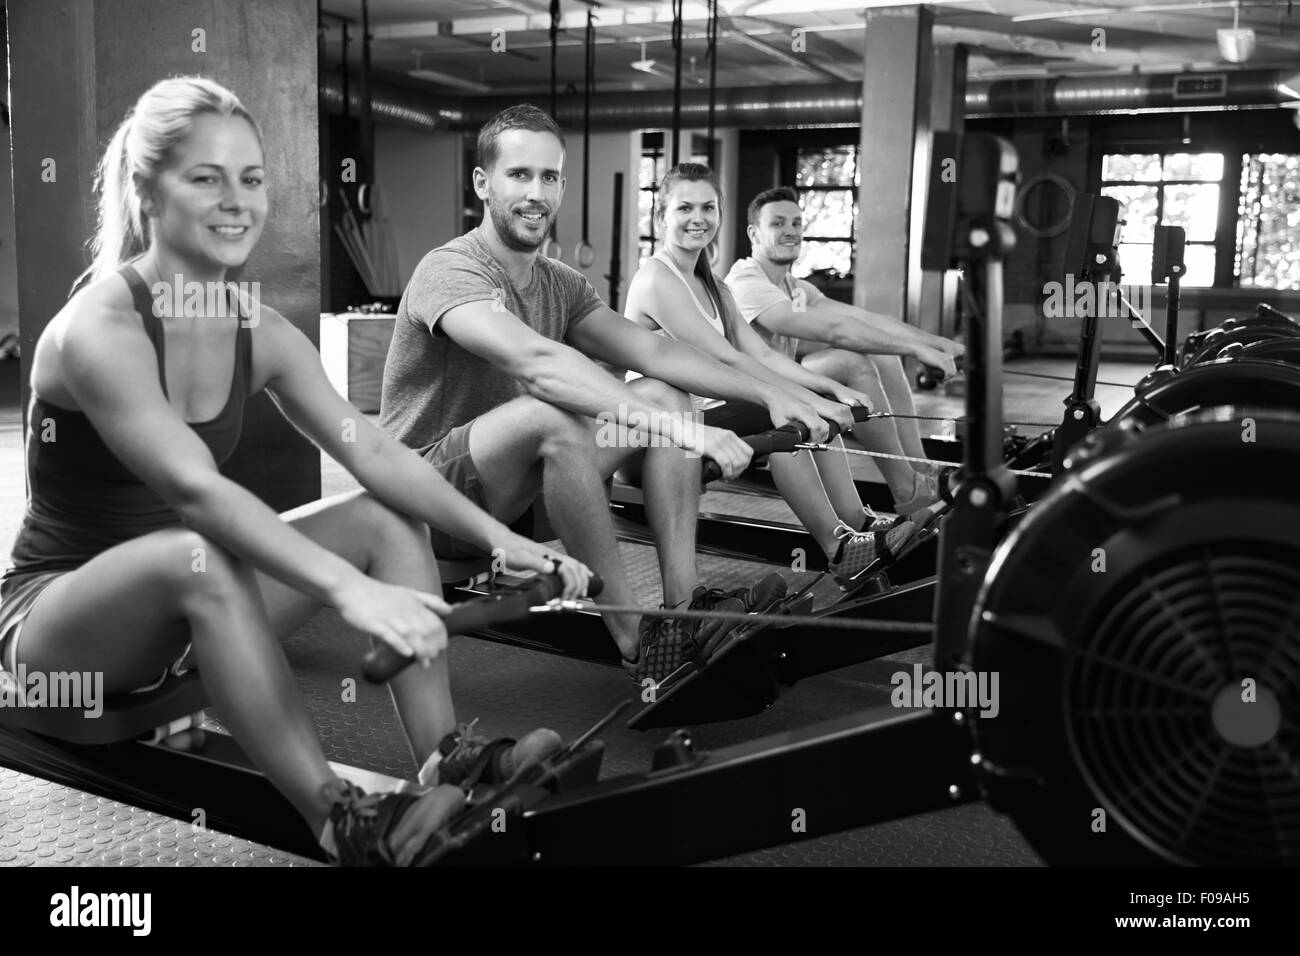 Black And White Shot Of Gym Class Using Rowing Machines Stock Photo